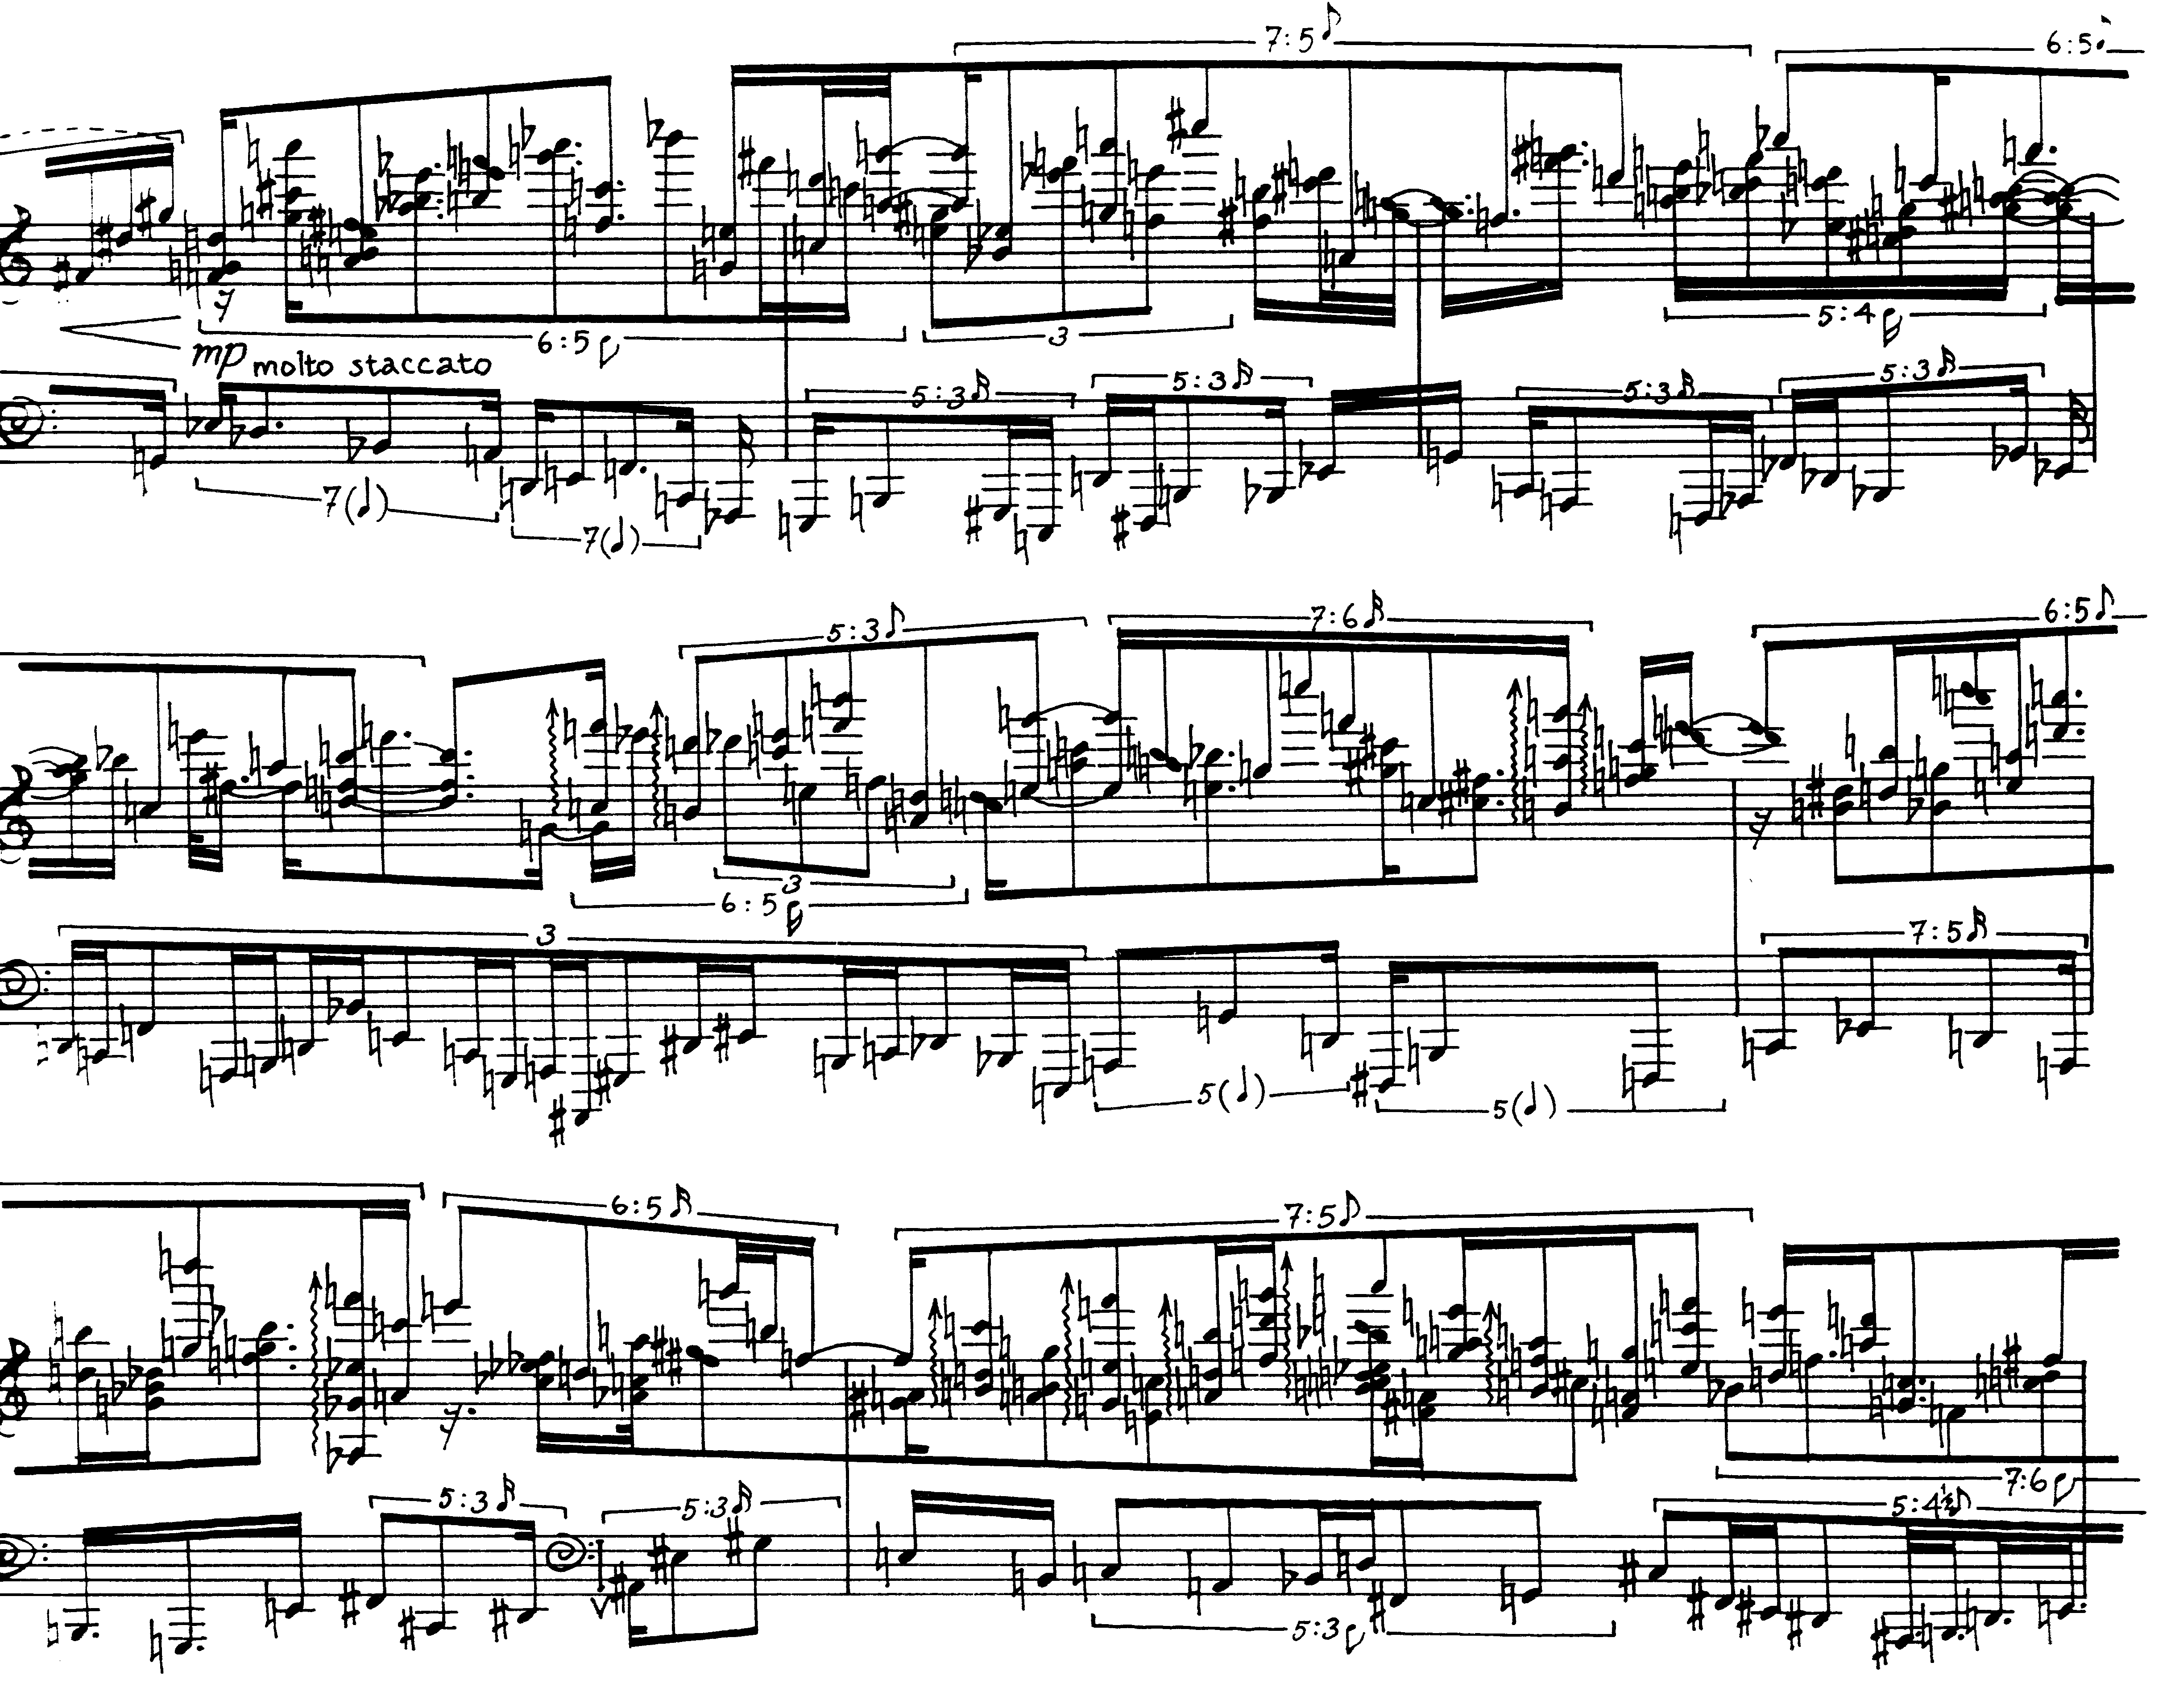 finnissy-section-from-kemps-morris